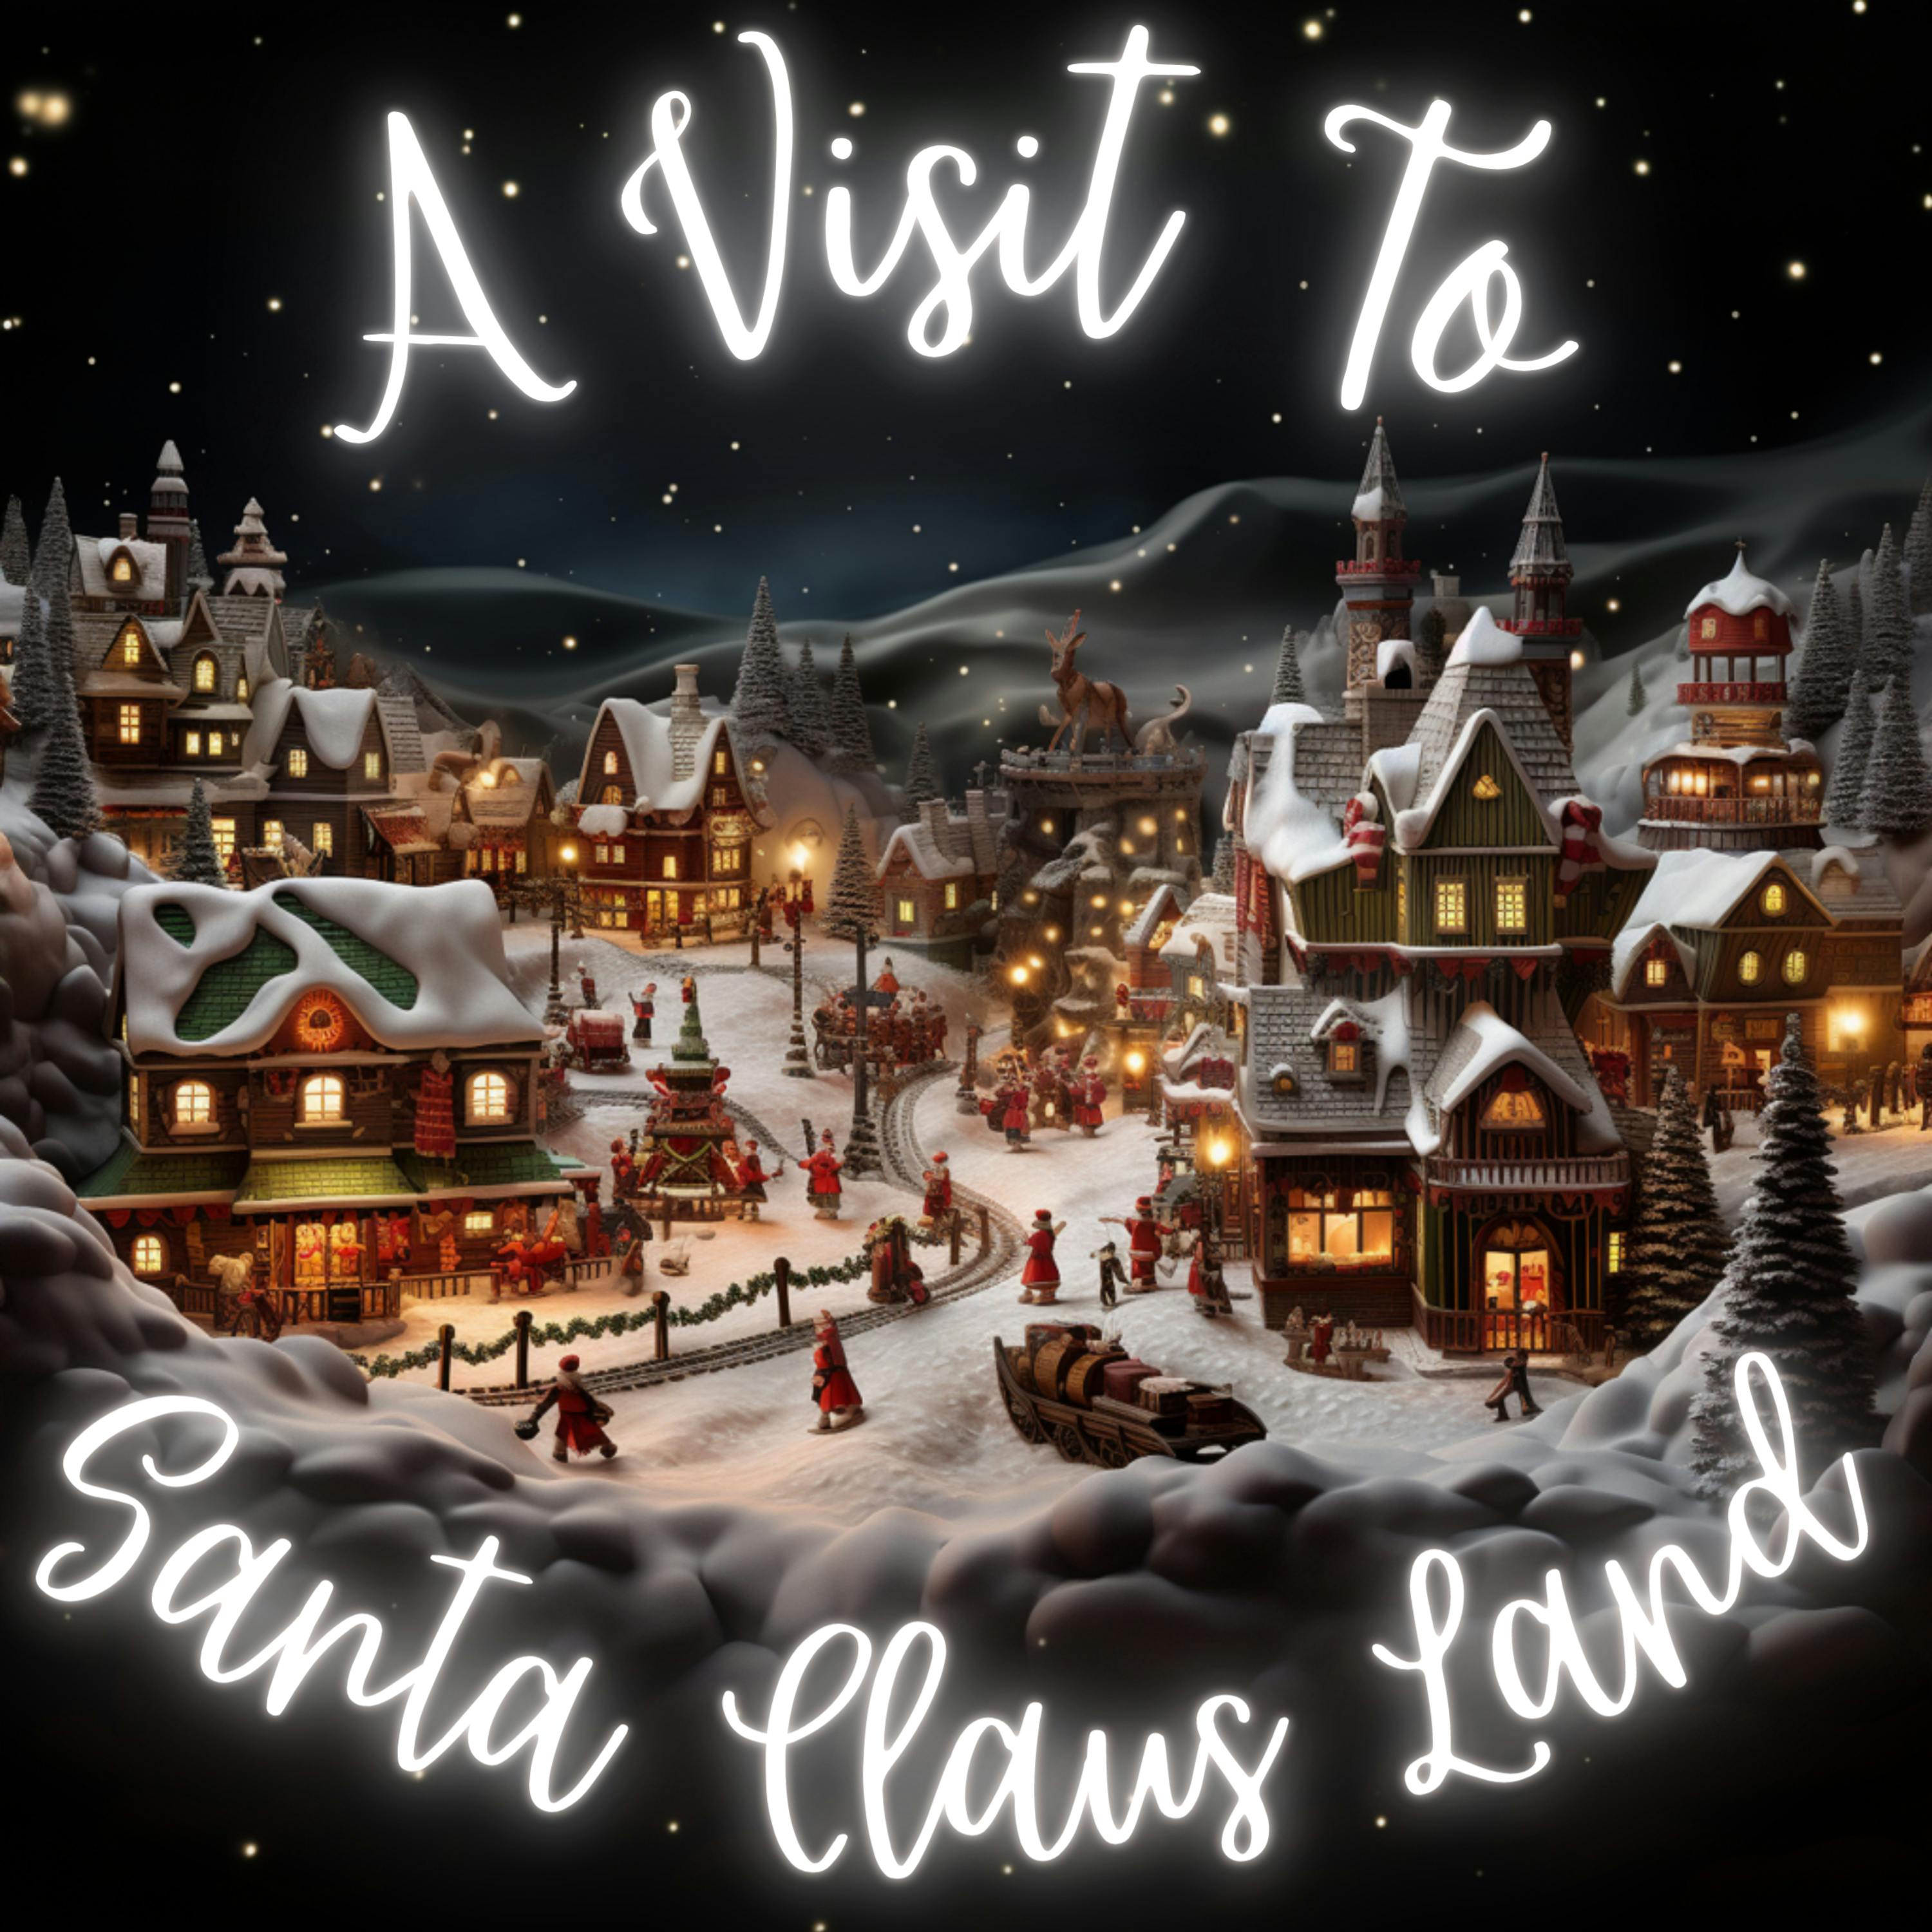 Christmas Bedtime Stories - A Visit to Santa Claus Land